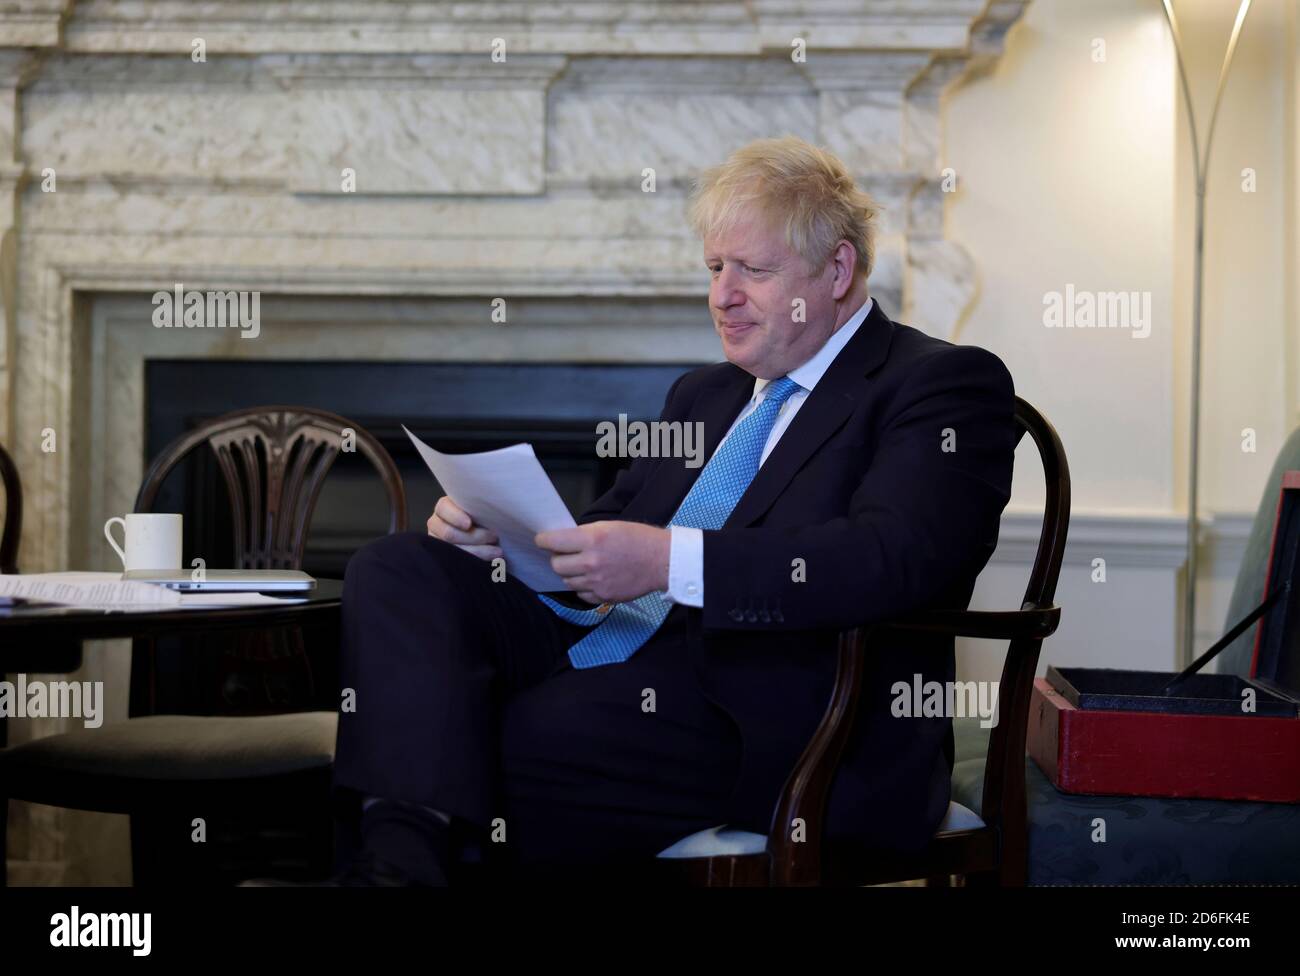 (201017) -- LONDON, Oct. 17, 2020 (Xinhua) -- British Prime Minister Boris Johnson prepares his Brexit statement in his office at 10 Downing Street, before filming a clip to the media on his reaction after the EU Summit, in London, Britain, on Oct. 16, 2020. Boris Johnson said Friday that as the European Union (EU) Summit in Brussels refused to offer London a Canada-style deal, Britain will prepare to embrace a no-trade deal scenario. Johnson made the response following the EU Summit discussions on Brexit Thursday. EU's chief Brexit negotiator Michel Barnier said he will continue intensive tal Stock Photo